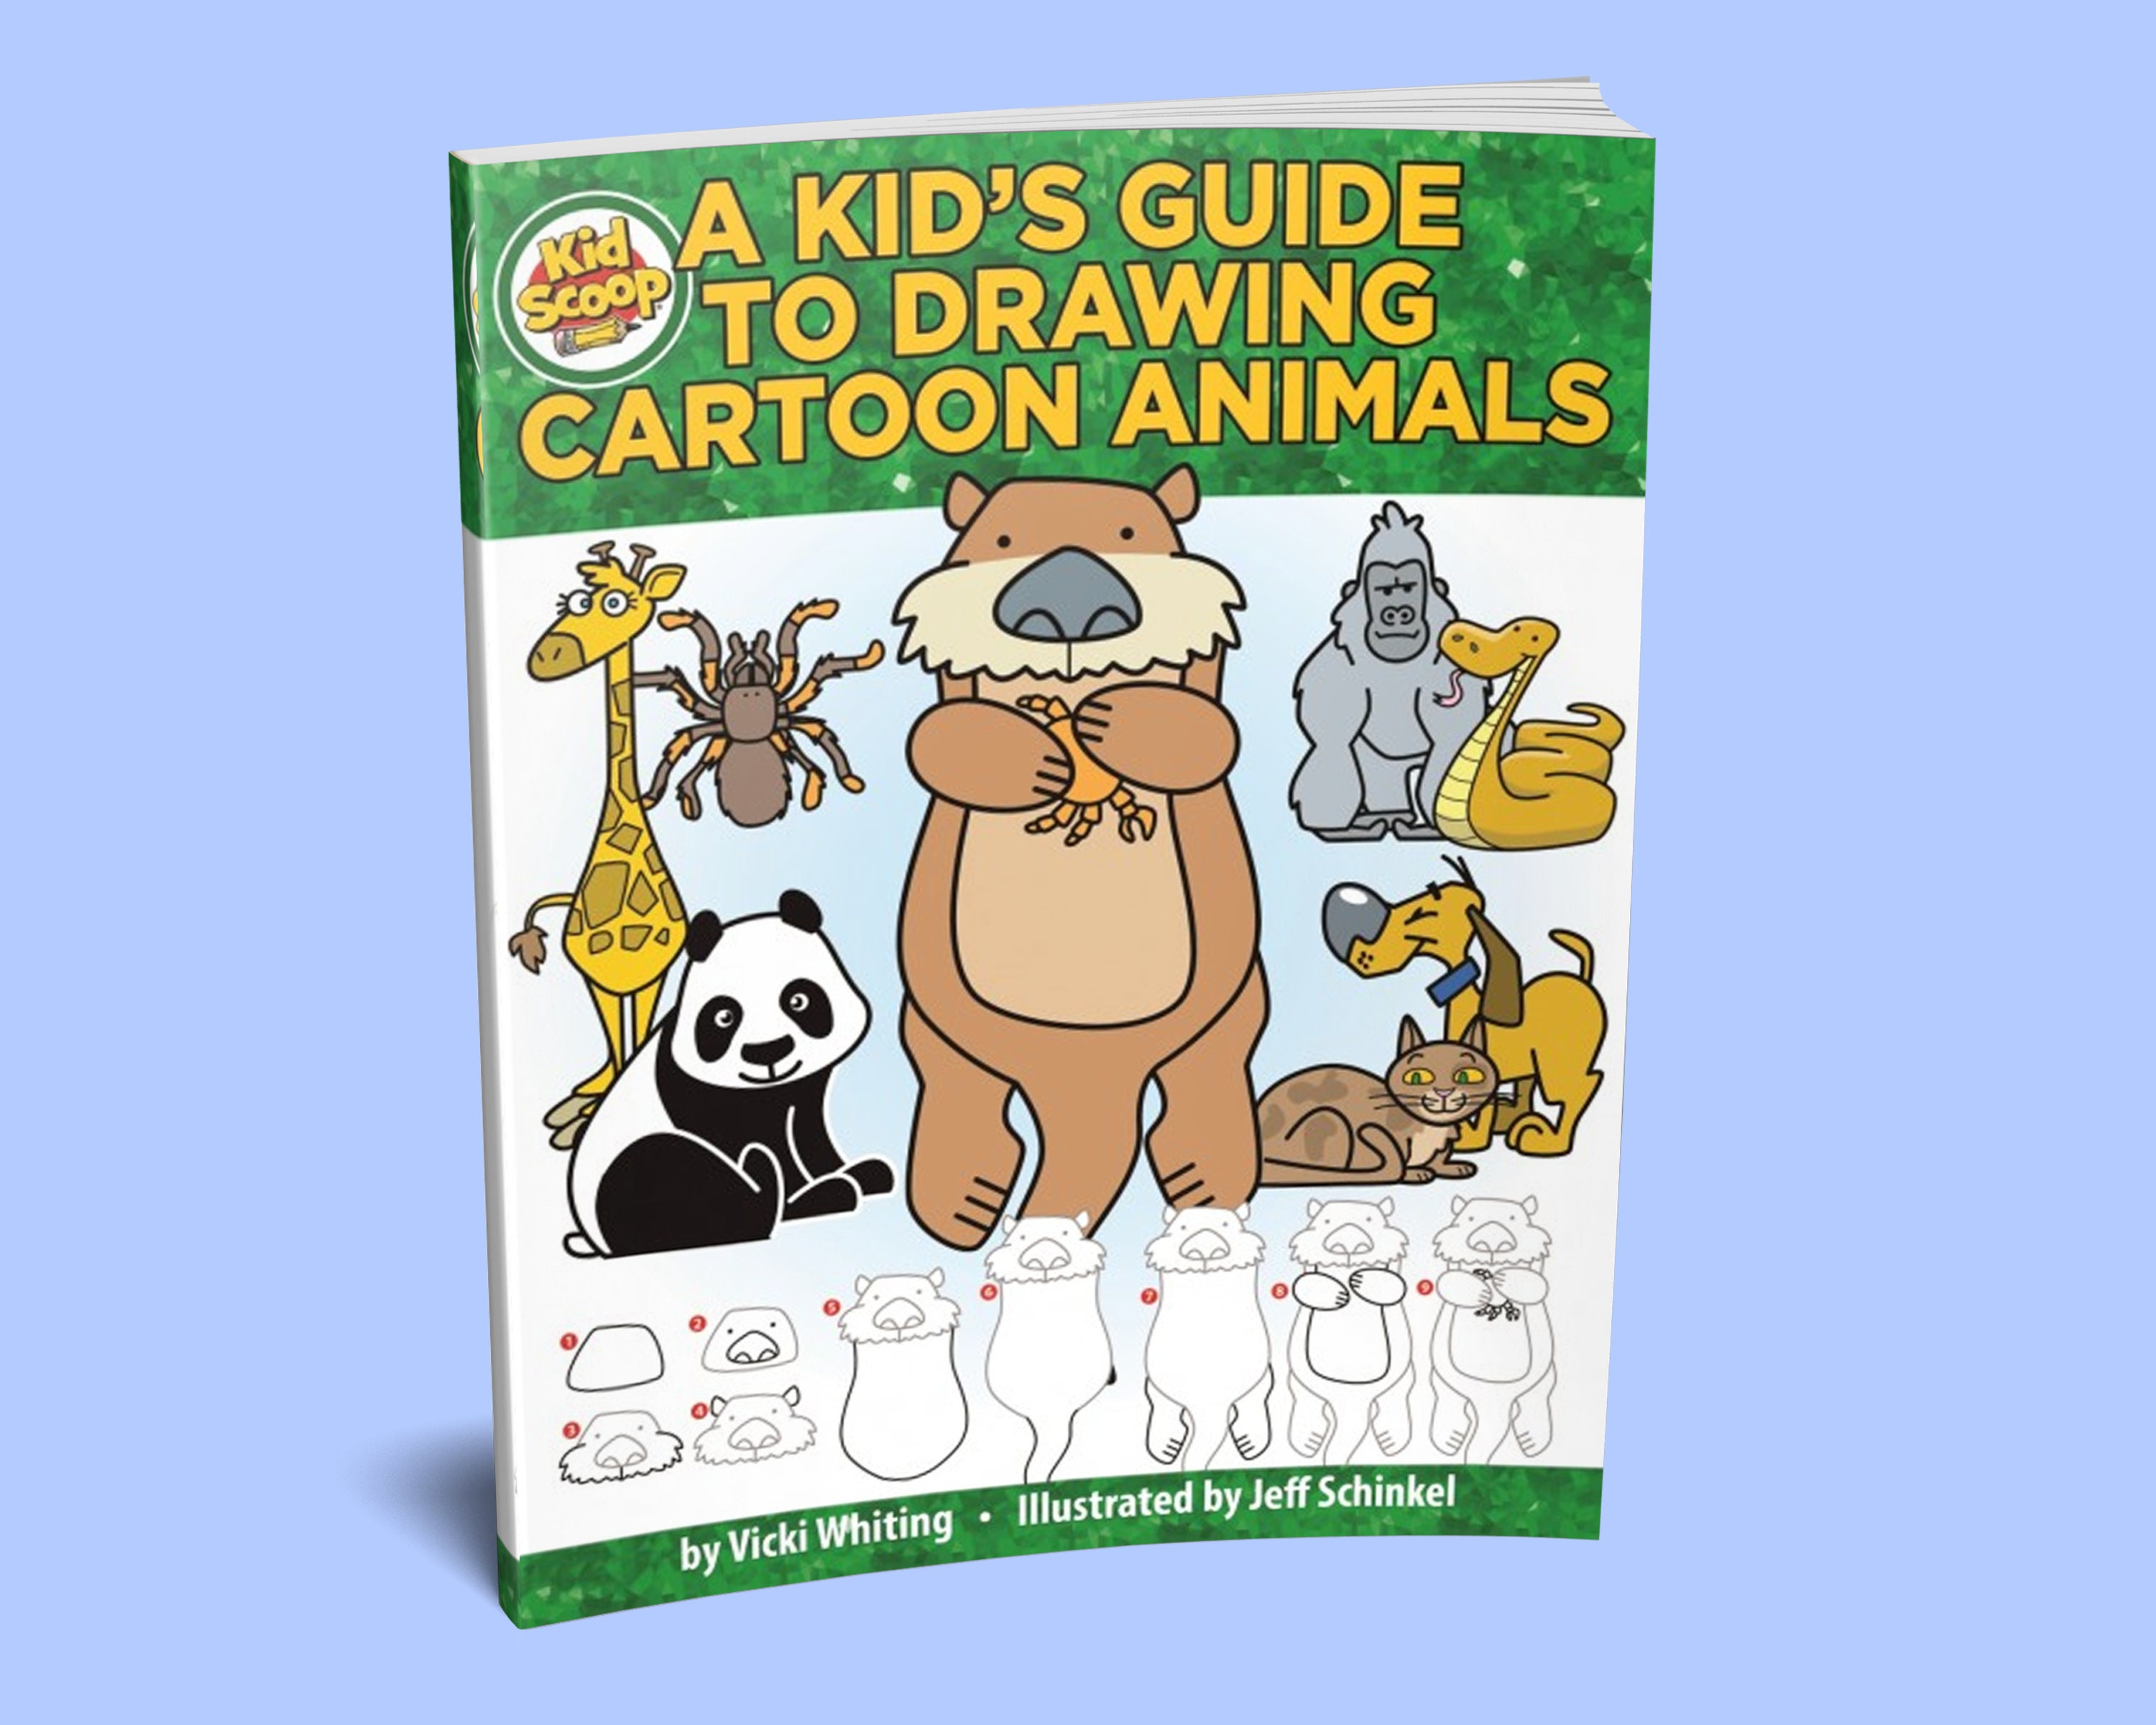 Sketchbook for Kids: Sketchbook for kids : Children Sketch Book for Drawing  Practice, Cute Cat Cover ( Best Gifts for Age 4, 5, 6, 7, 8, 9, 10, 11, and  12 Year